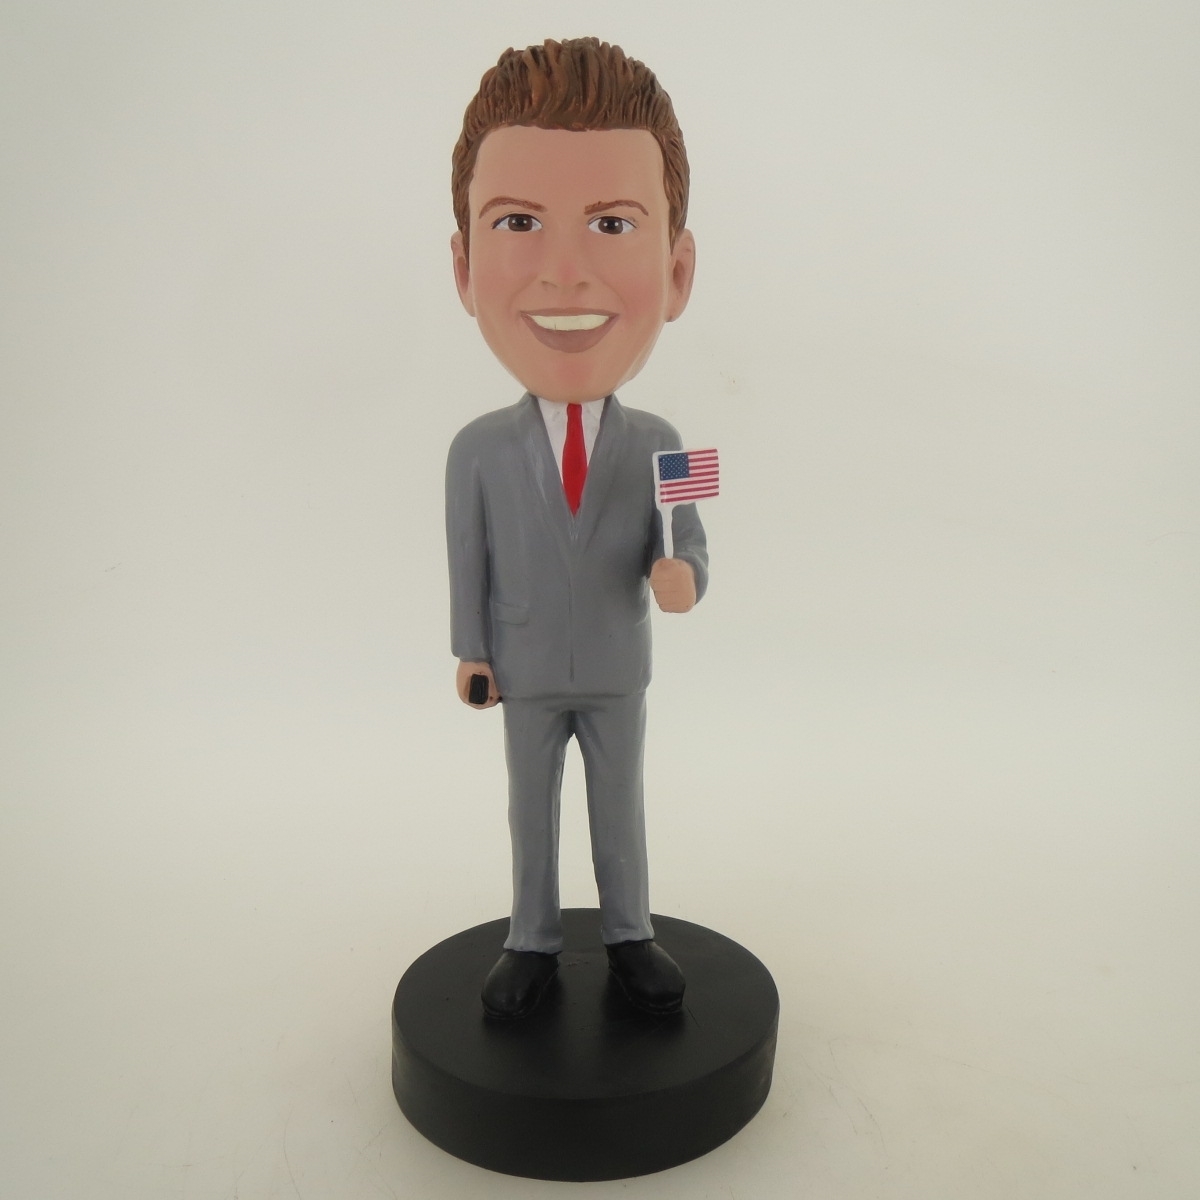 Picture of Custom Bobblehead Doll: Man Holding American Flag